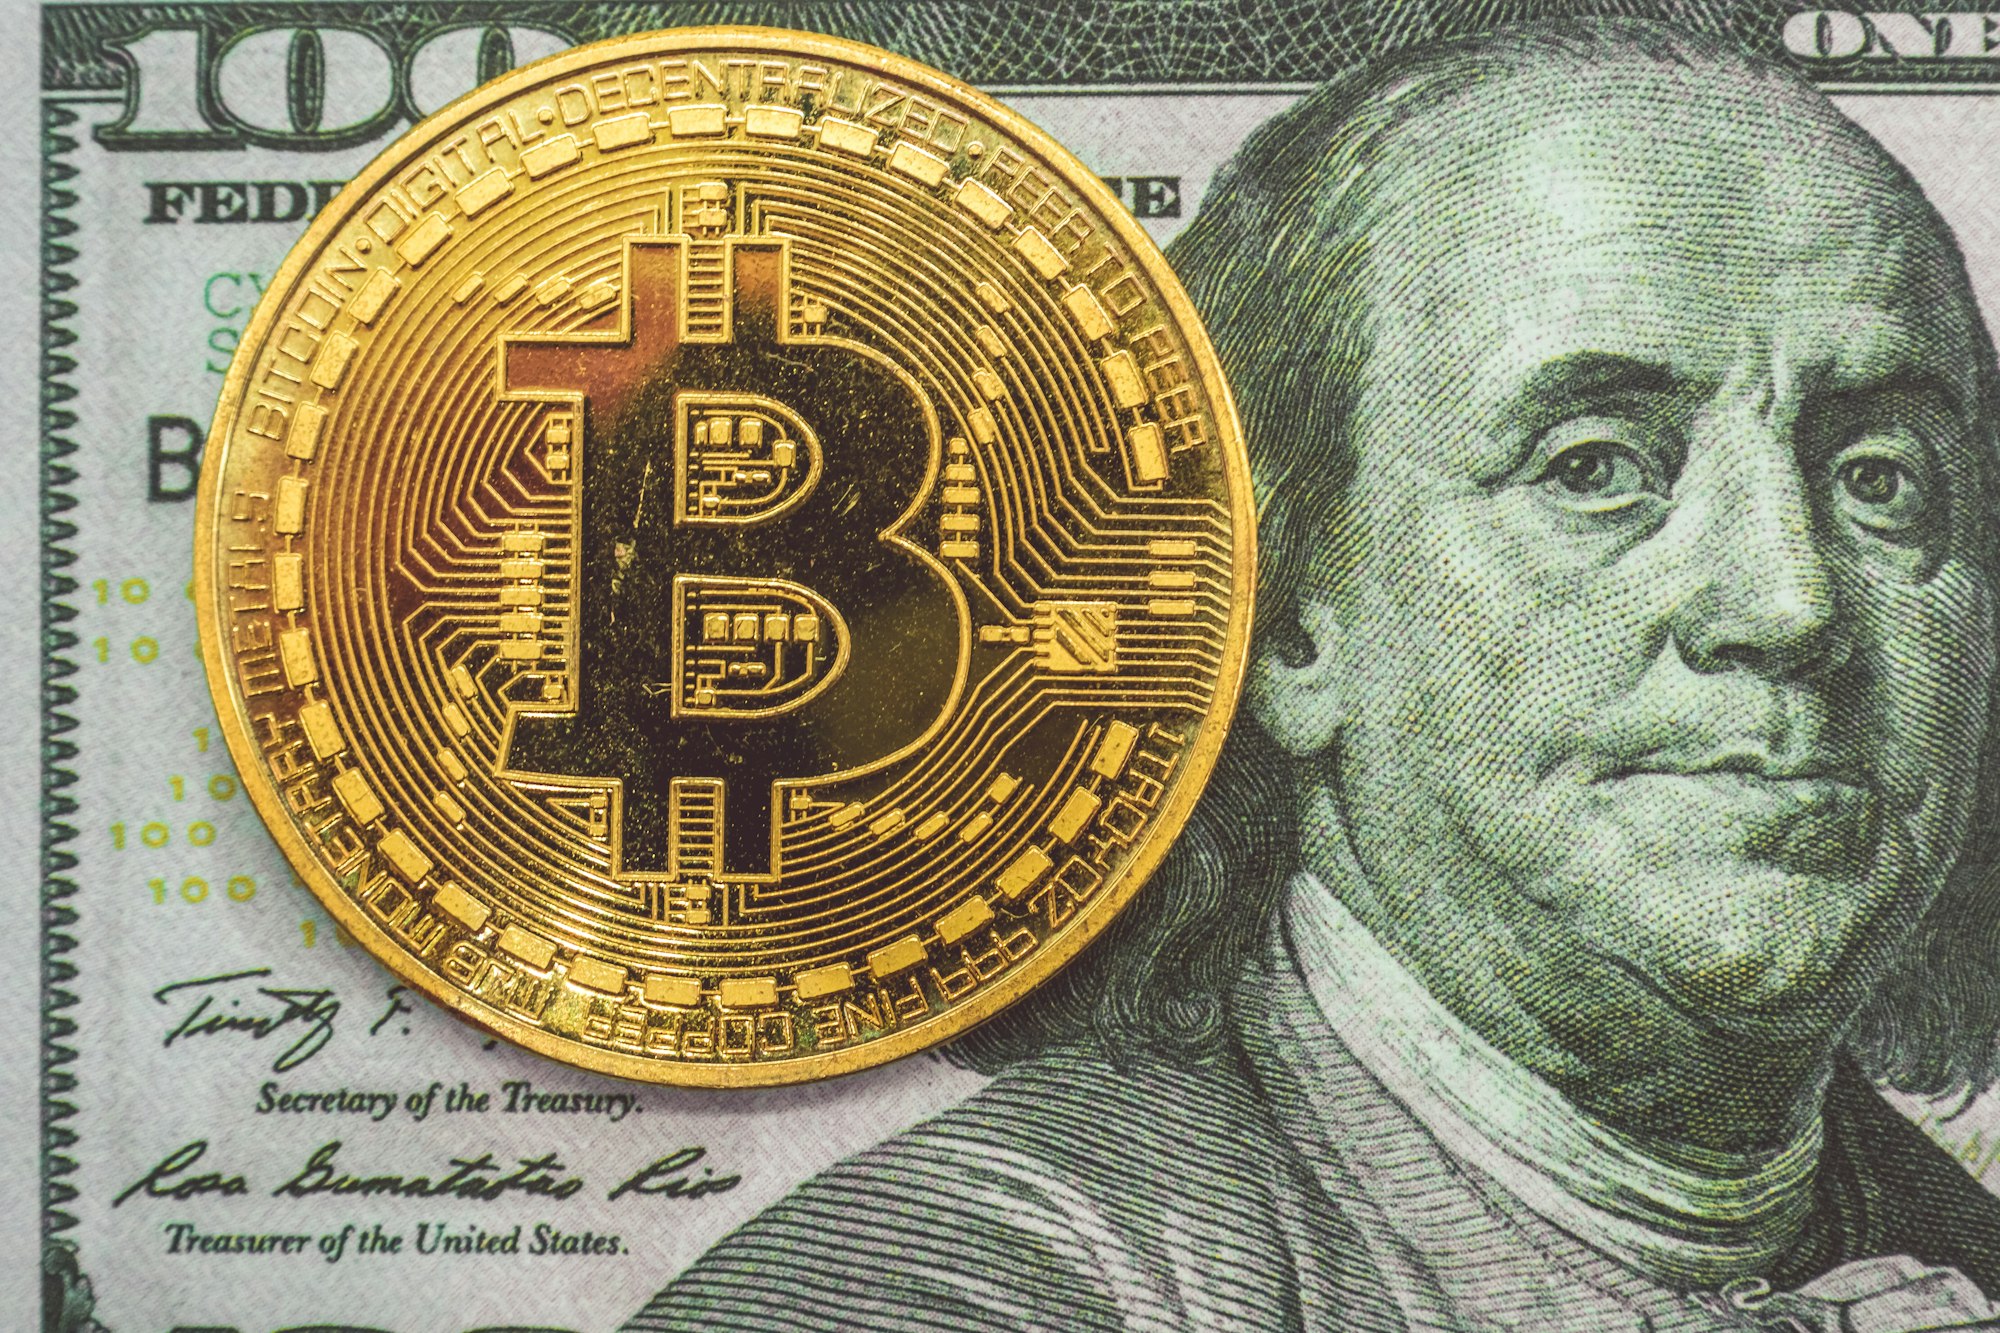 On 31 October, a link to a paper authored by Satoshi Nakamoto titled Bitcoin: